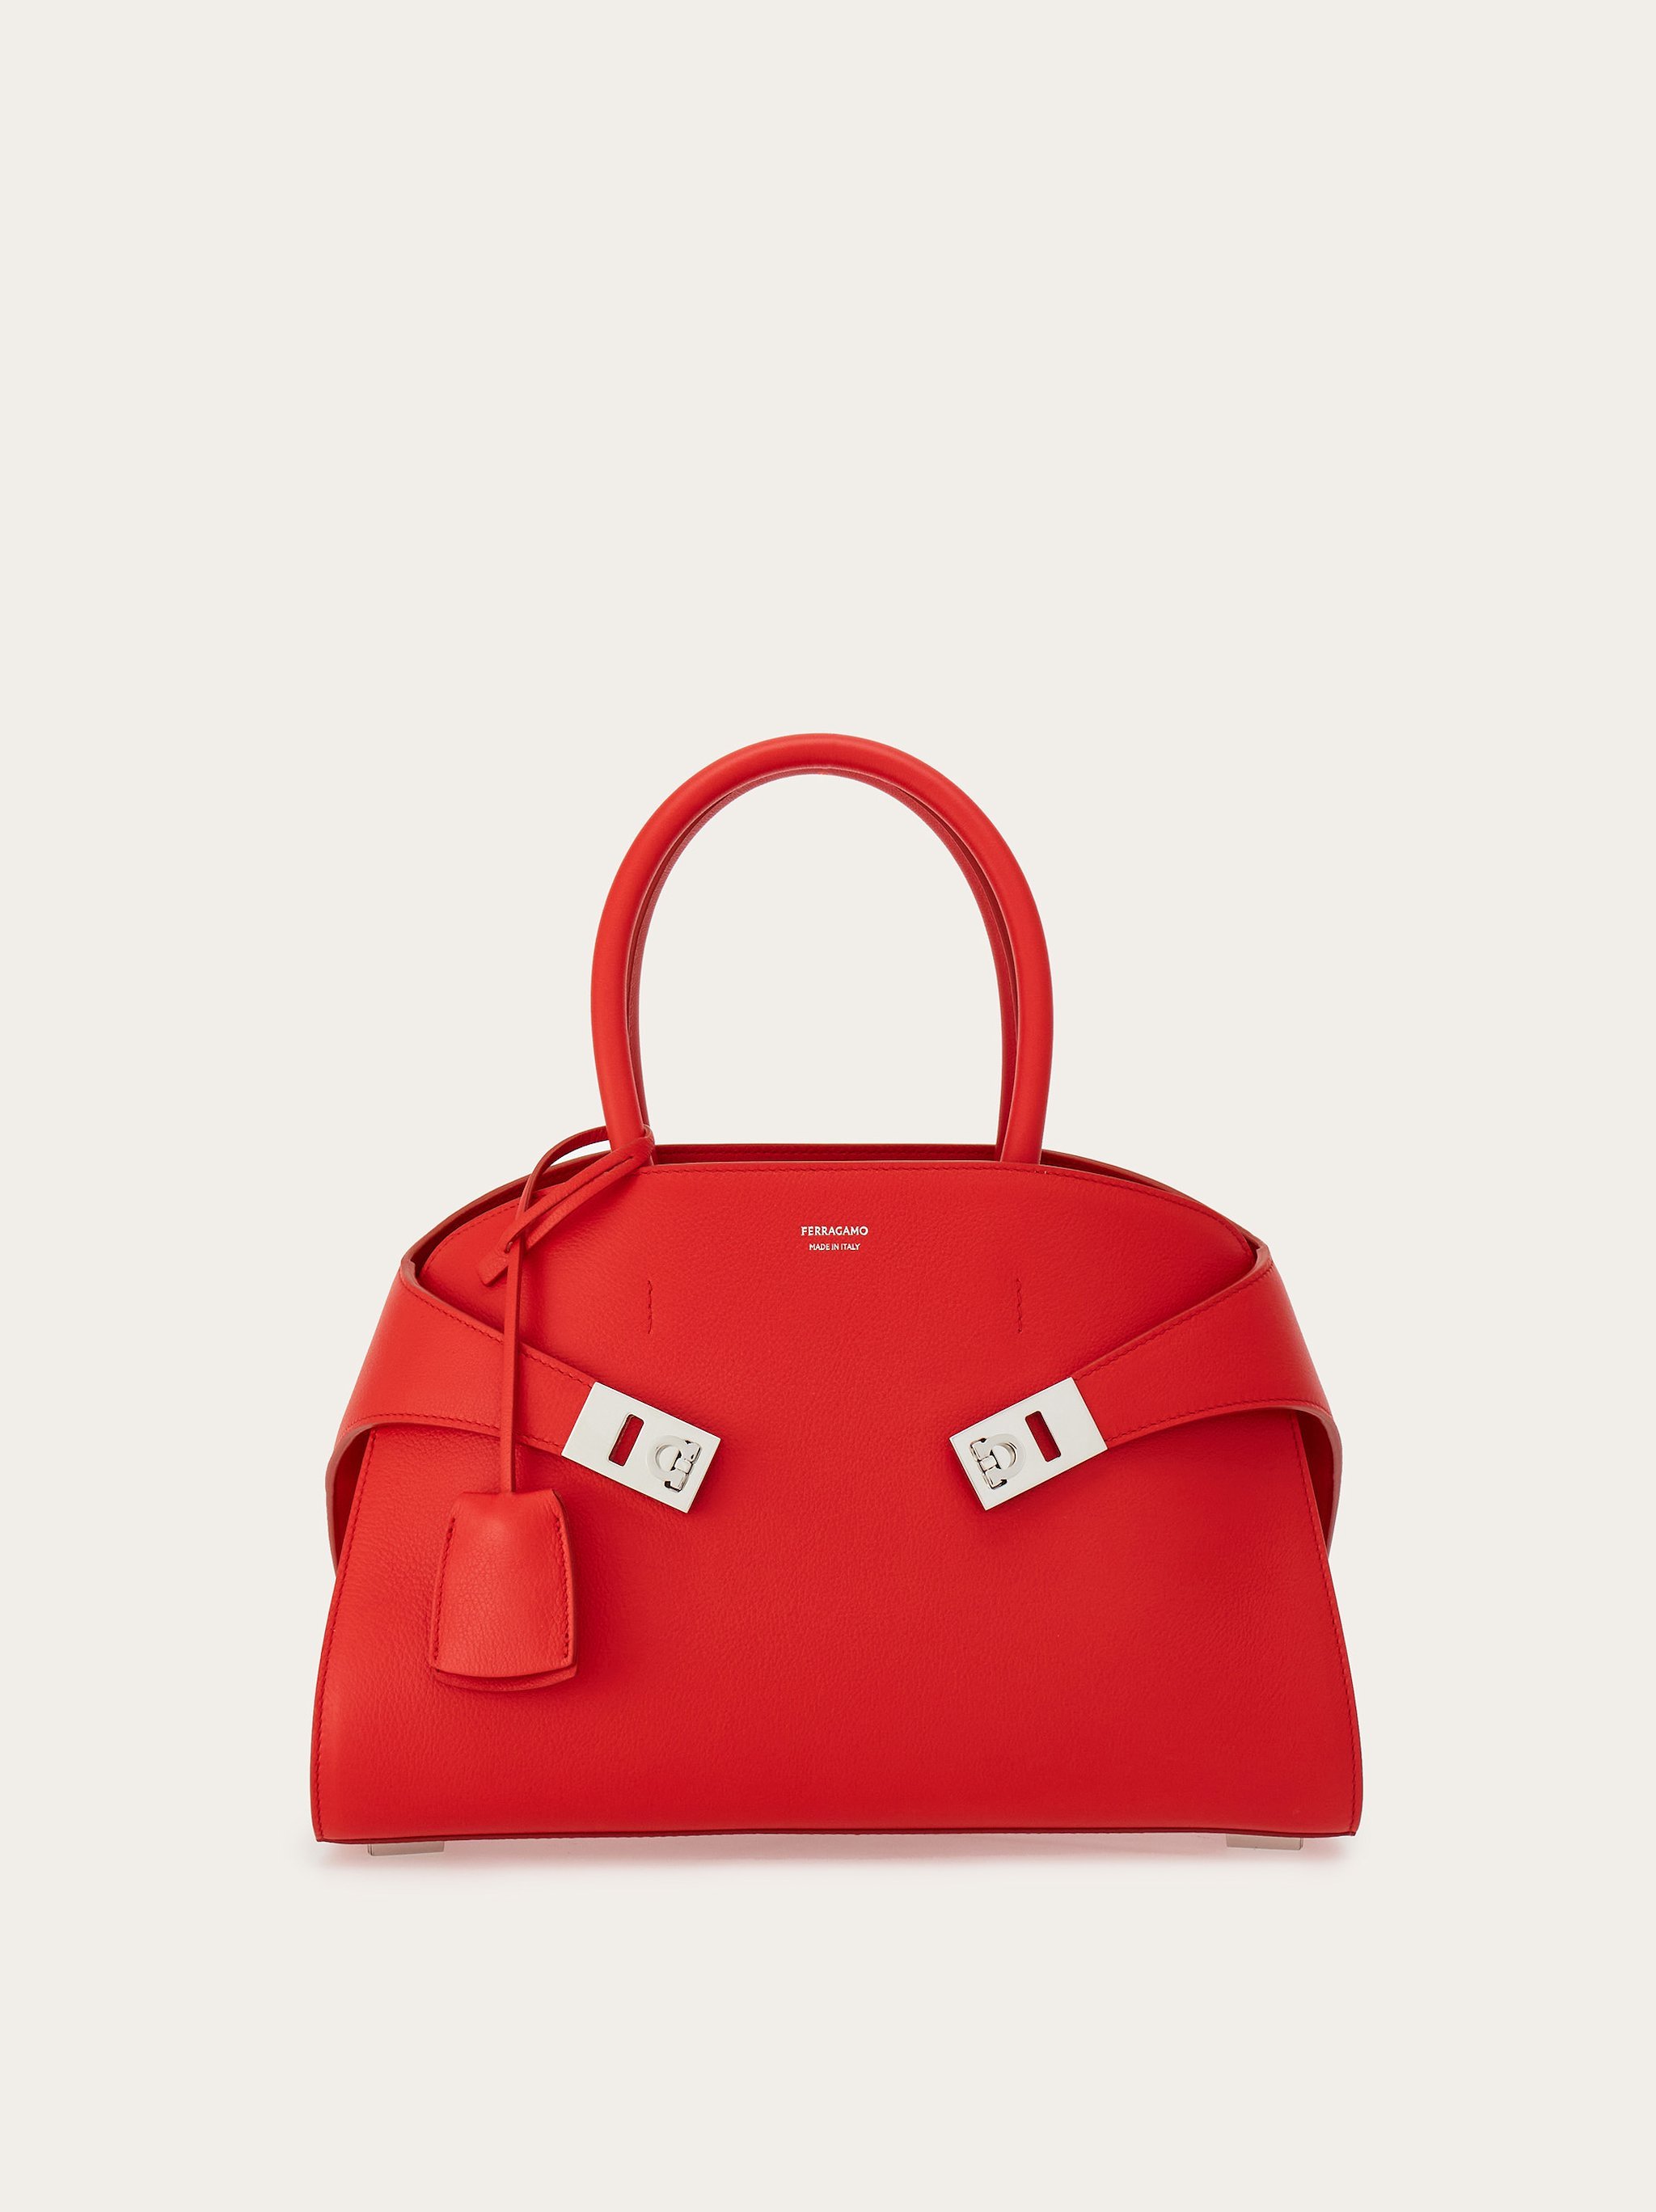 A Classic Handbag Capsule Collection for 2023 | Who What Wear UK